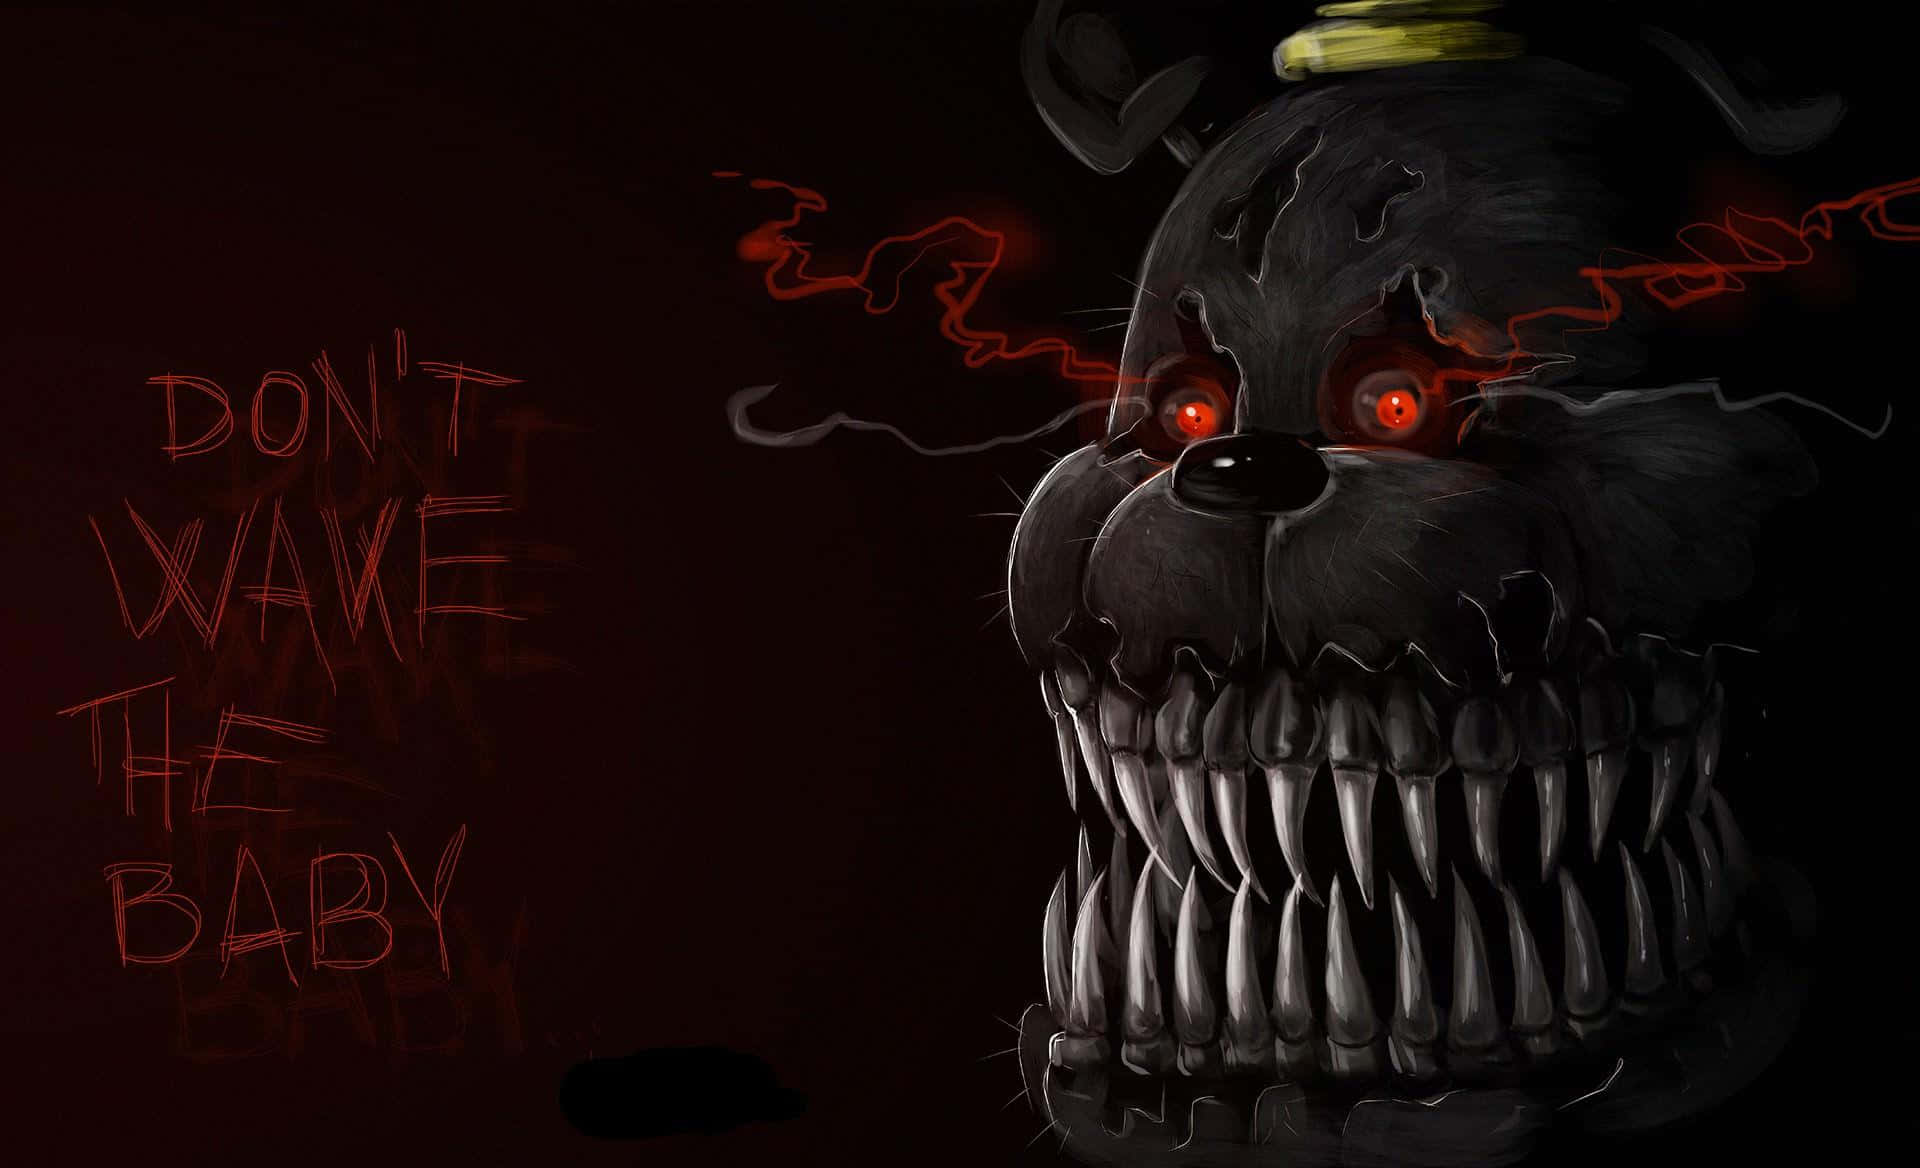 Five Nights At Freddy's - Don't Wake The Baby Wallpaper